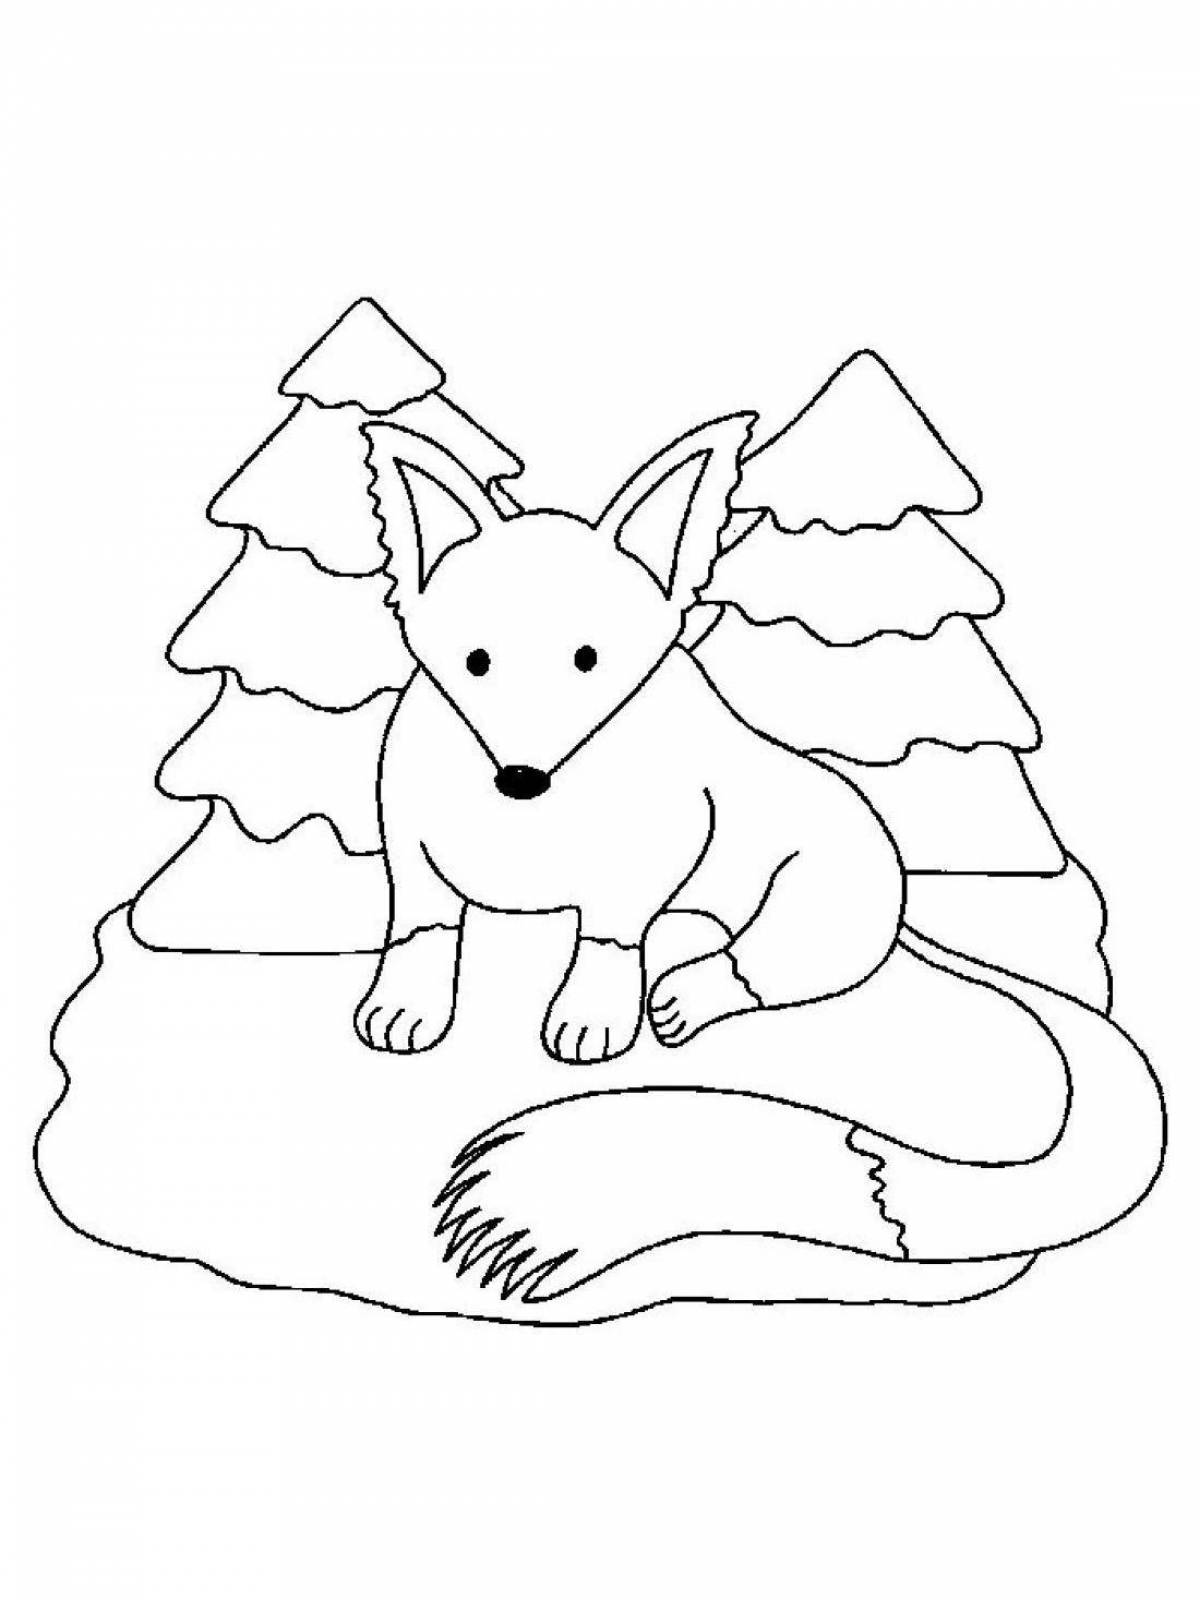 Radiant coloring page foxes in the forest